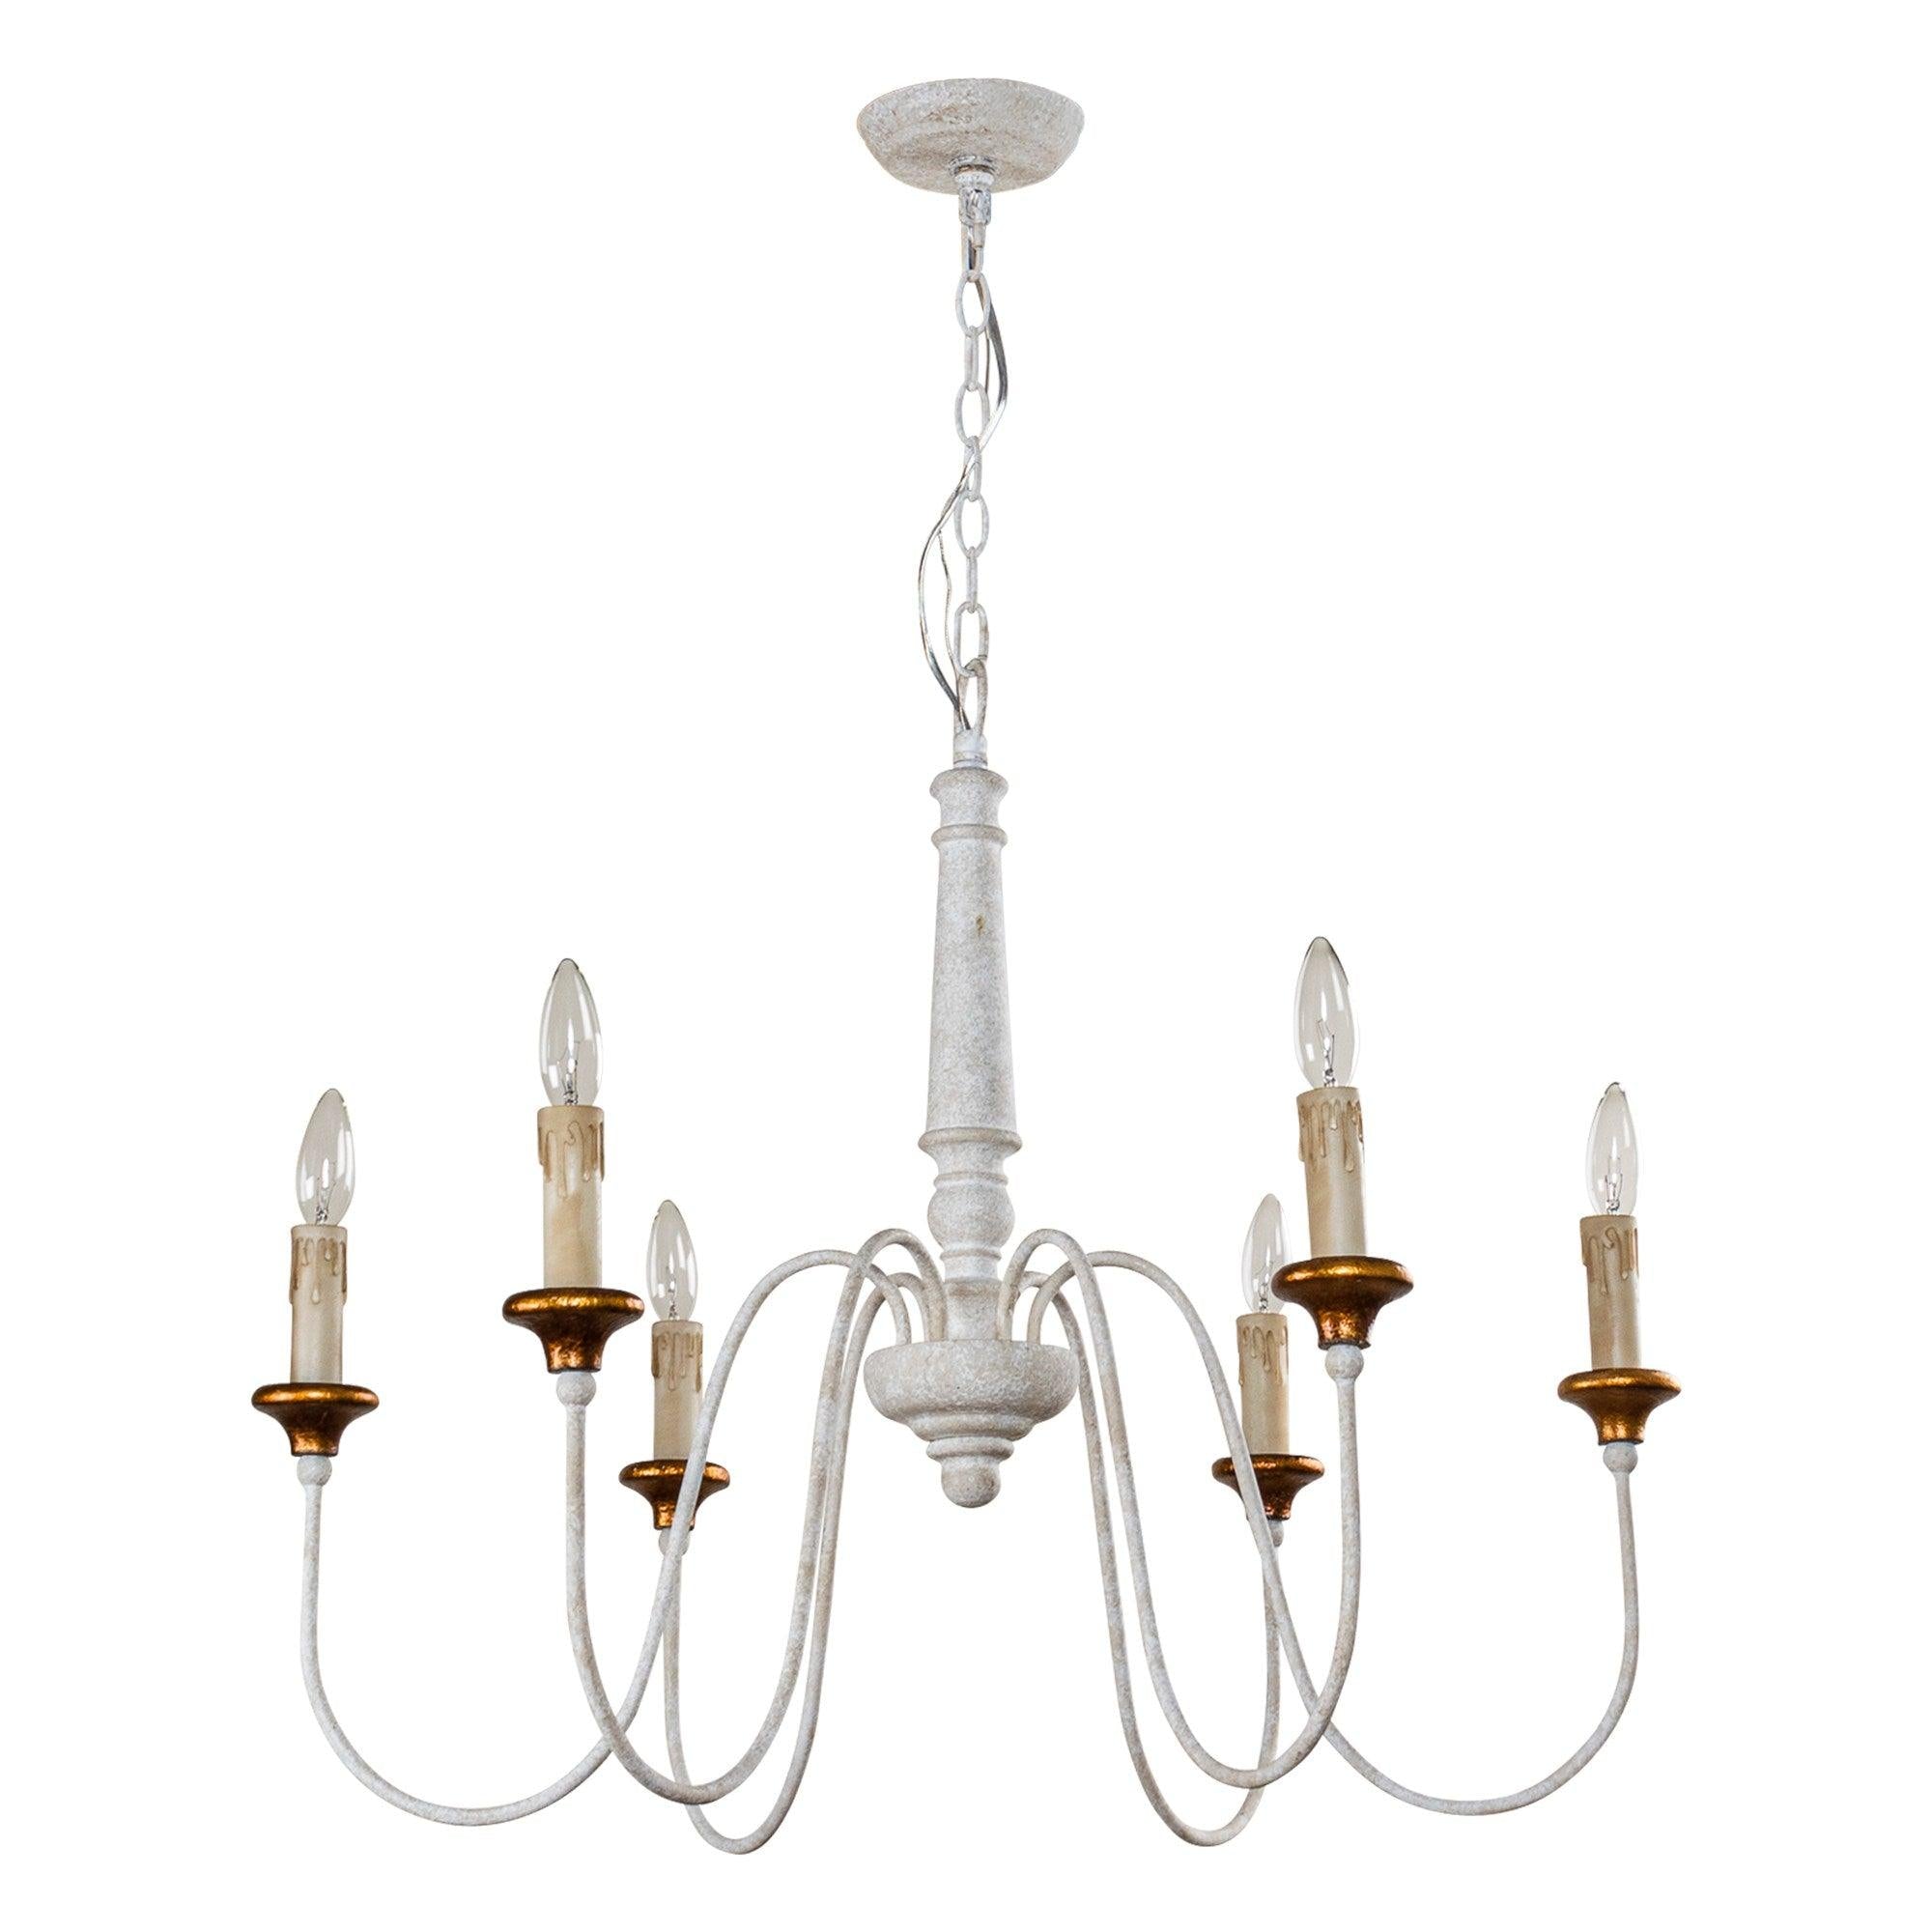 6-Light French Country Candle-Style Chandelier in Distressed - ParrotUncle